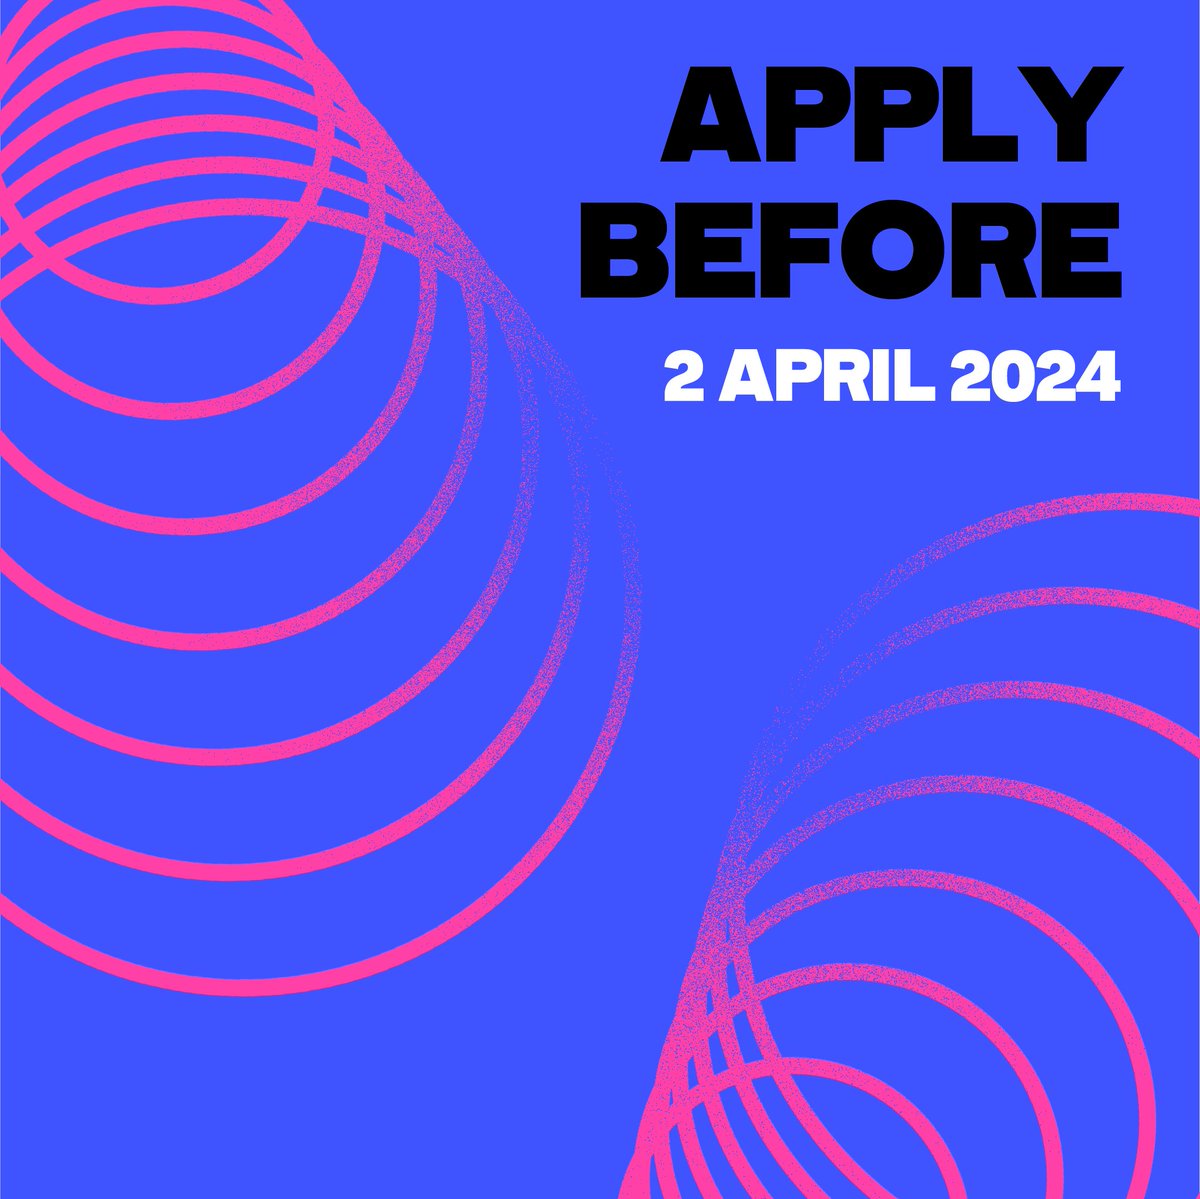 Sunny Side of the Doc launches its new call for entries 𝐈𝐧𝐧𝐨𝐯𝐚𝐭𝐢𝐨𝐧 𝐖𝐈𝐏! Benefit from targeted meetings with decision-makers, tailored guidance, dedicated highlights and exchanges, and exhibit your work in the Studio! at #SSD24 🚀 ➤ bit.ly/innovation_wip